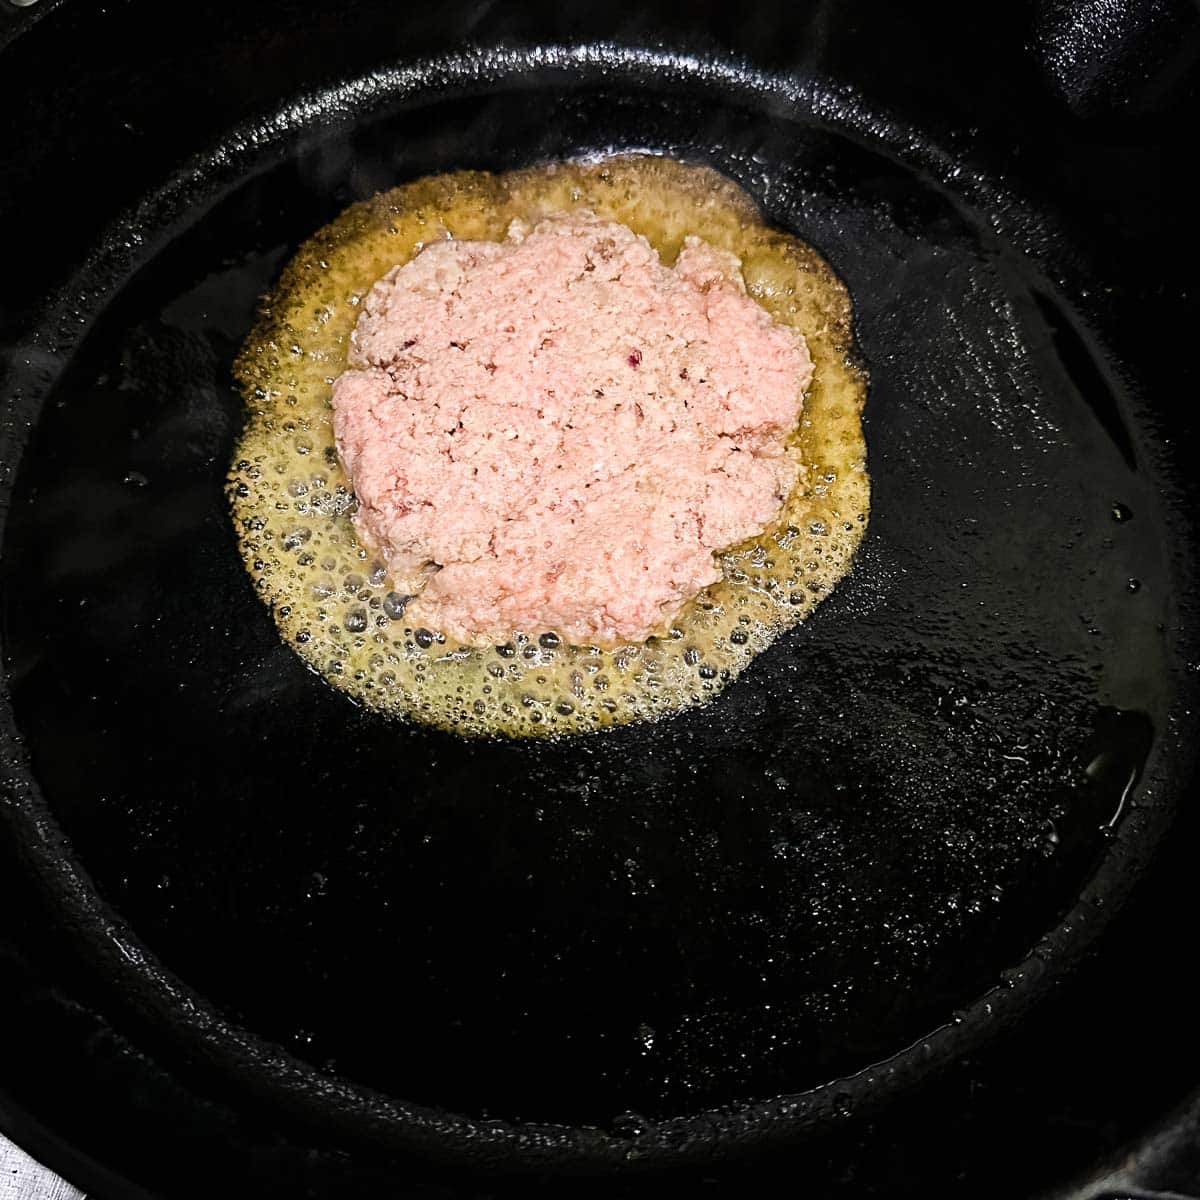 Turkey burger cooking in a cast iron pan.